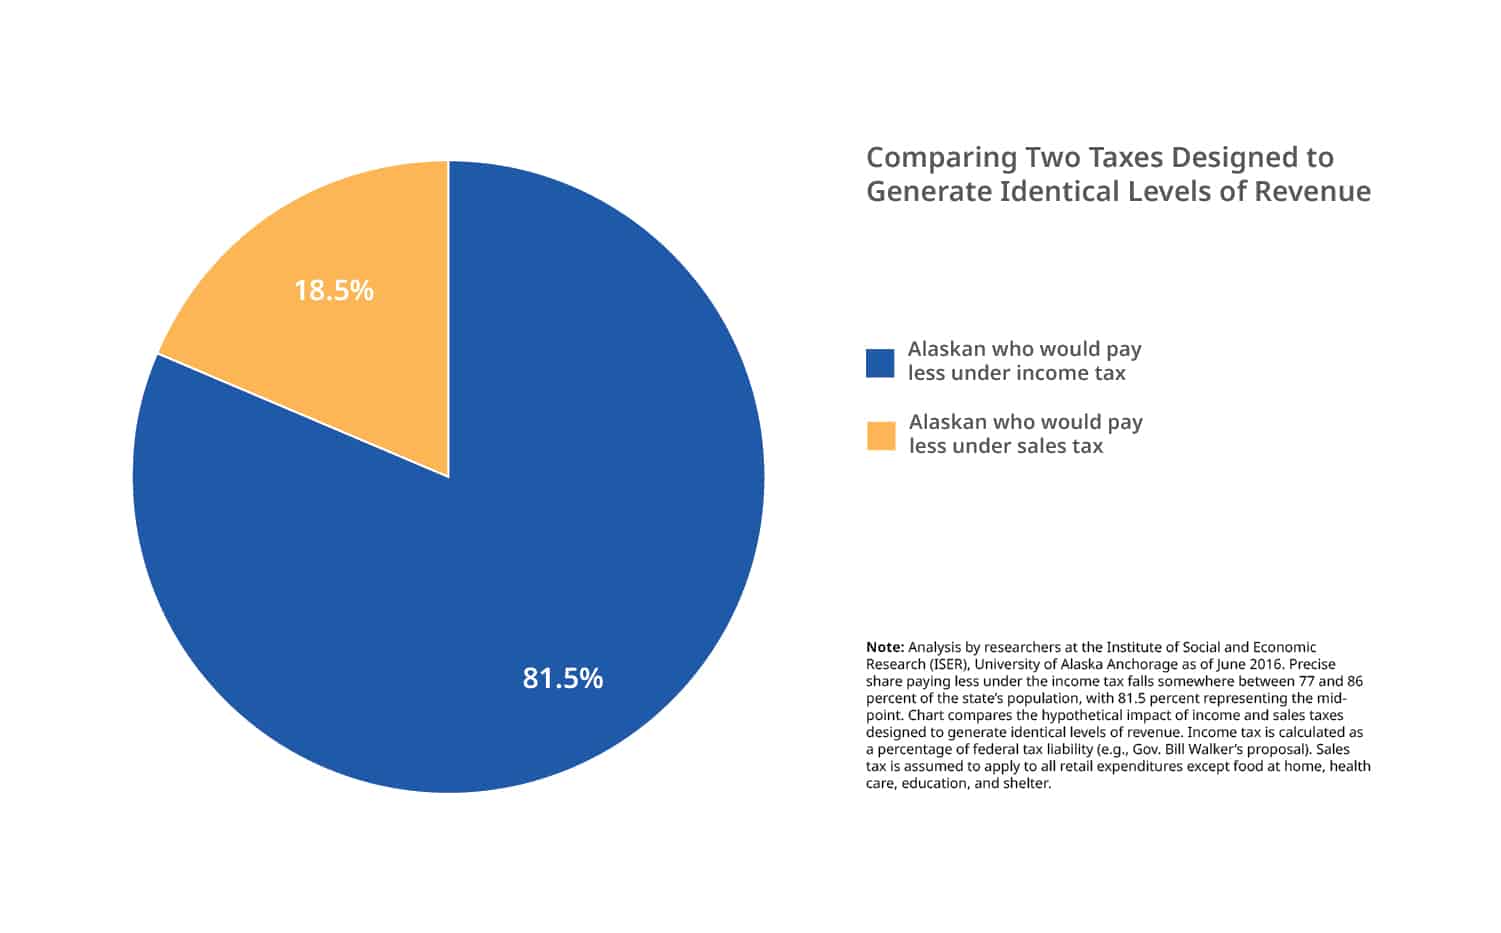 Most Alaskans Would Pay Less under an Income Tax